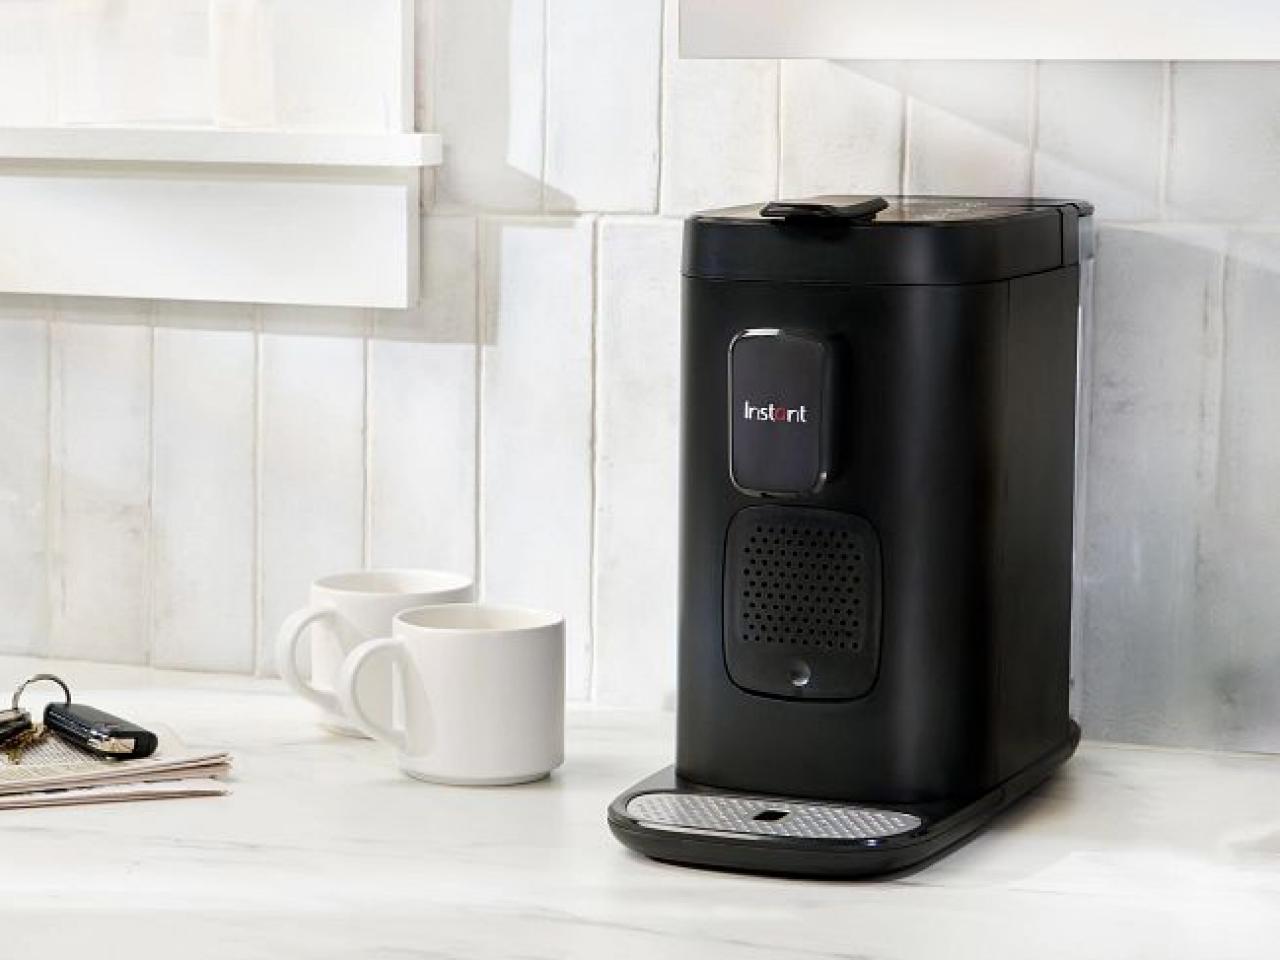 Instant Pot has launched a coffee/espresso maker, the Instant Pod